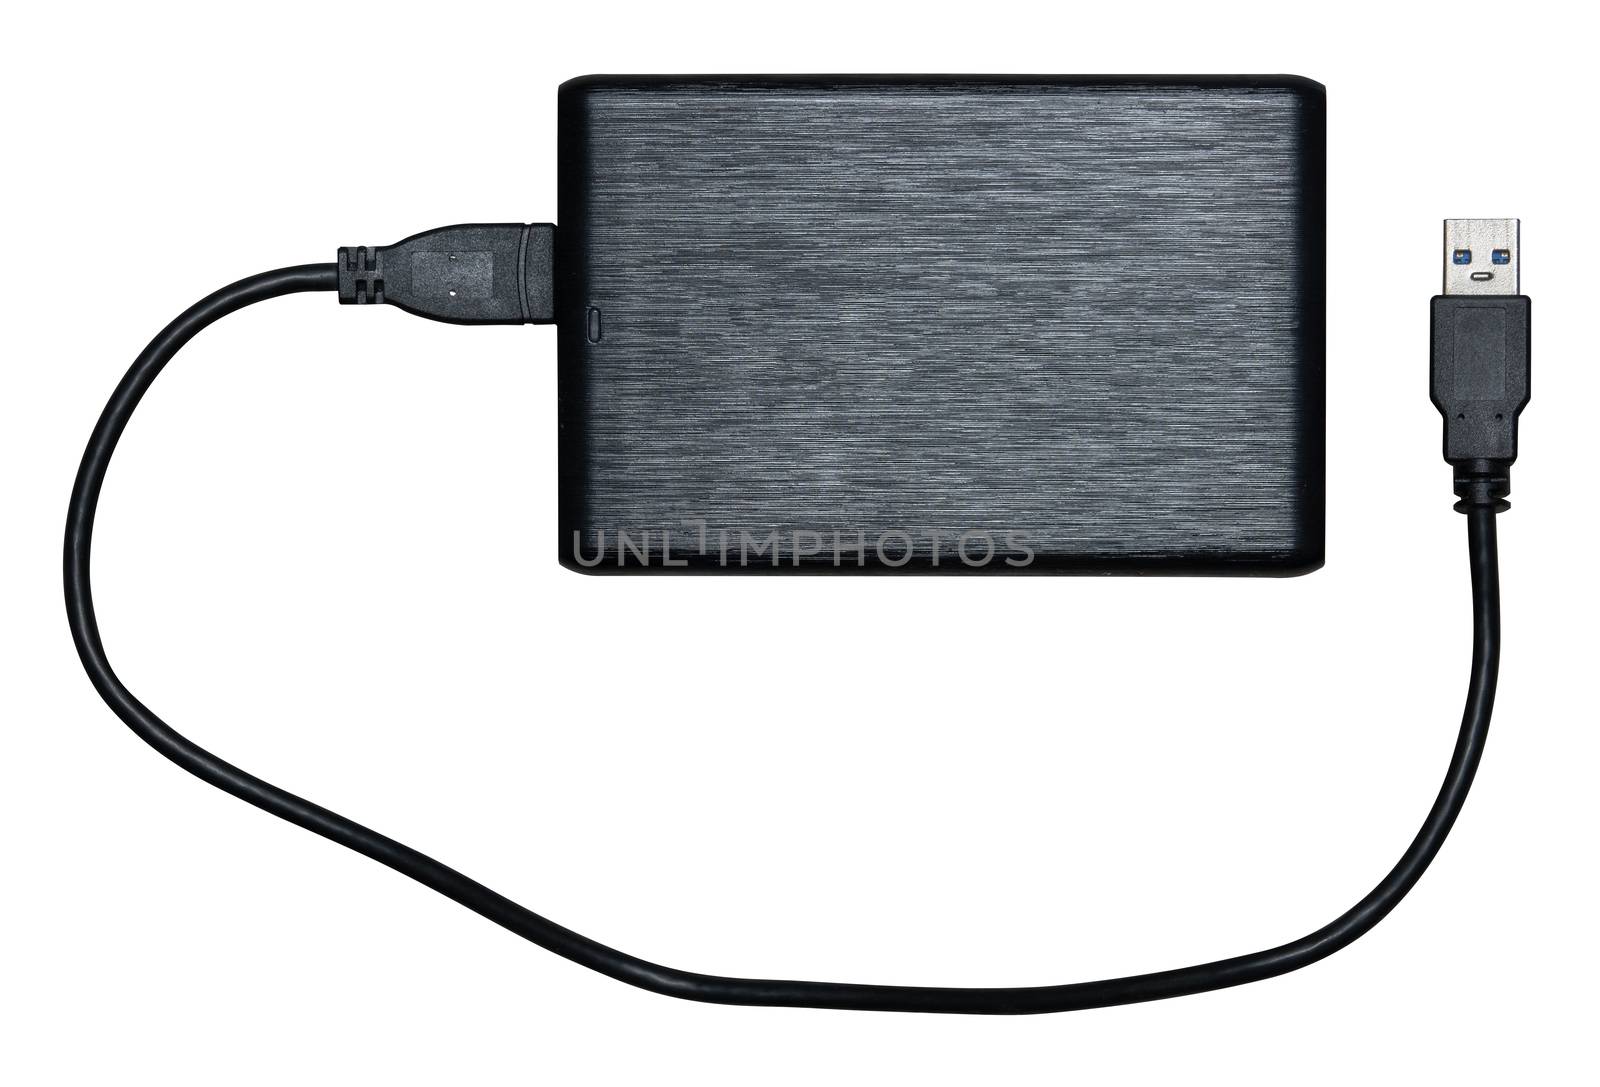 Isolated Black External Hard Disk (HDD) With USB Cable On A White Background